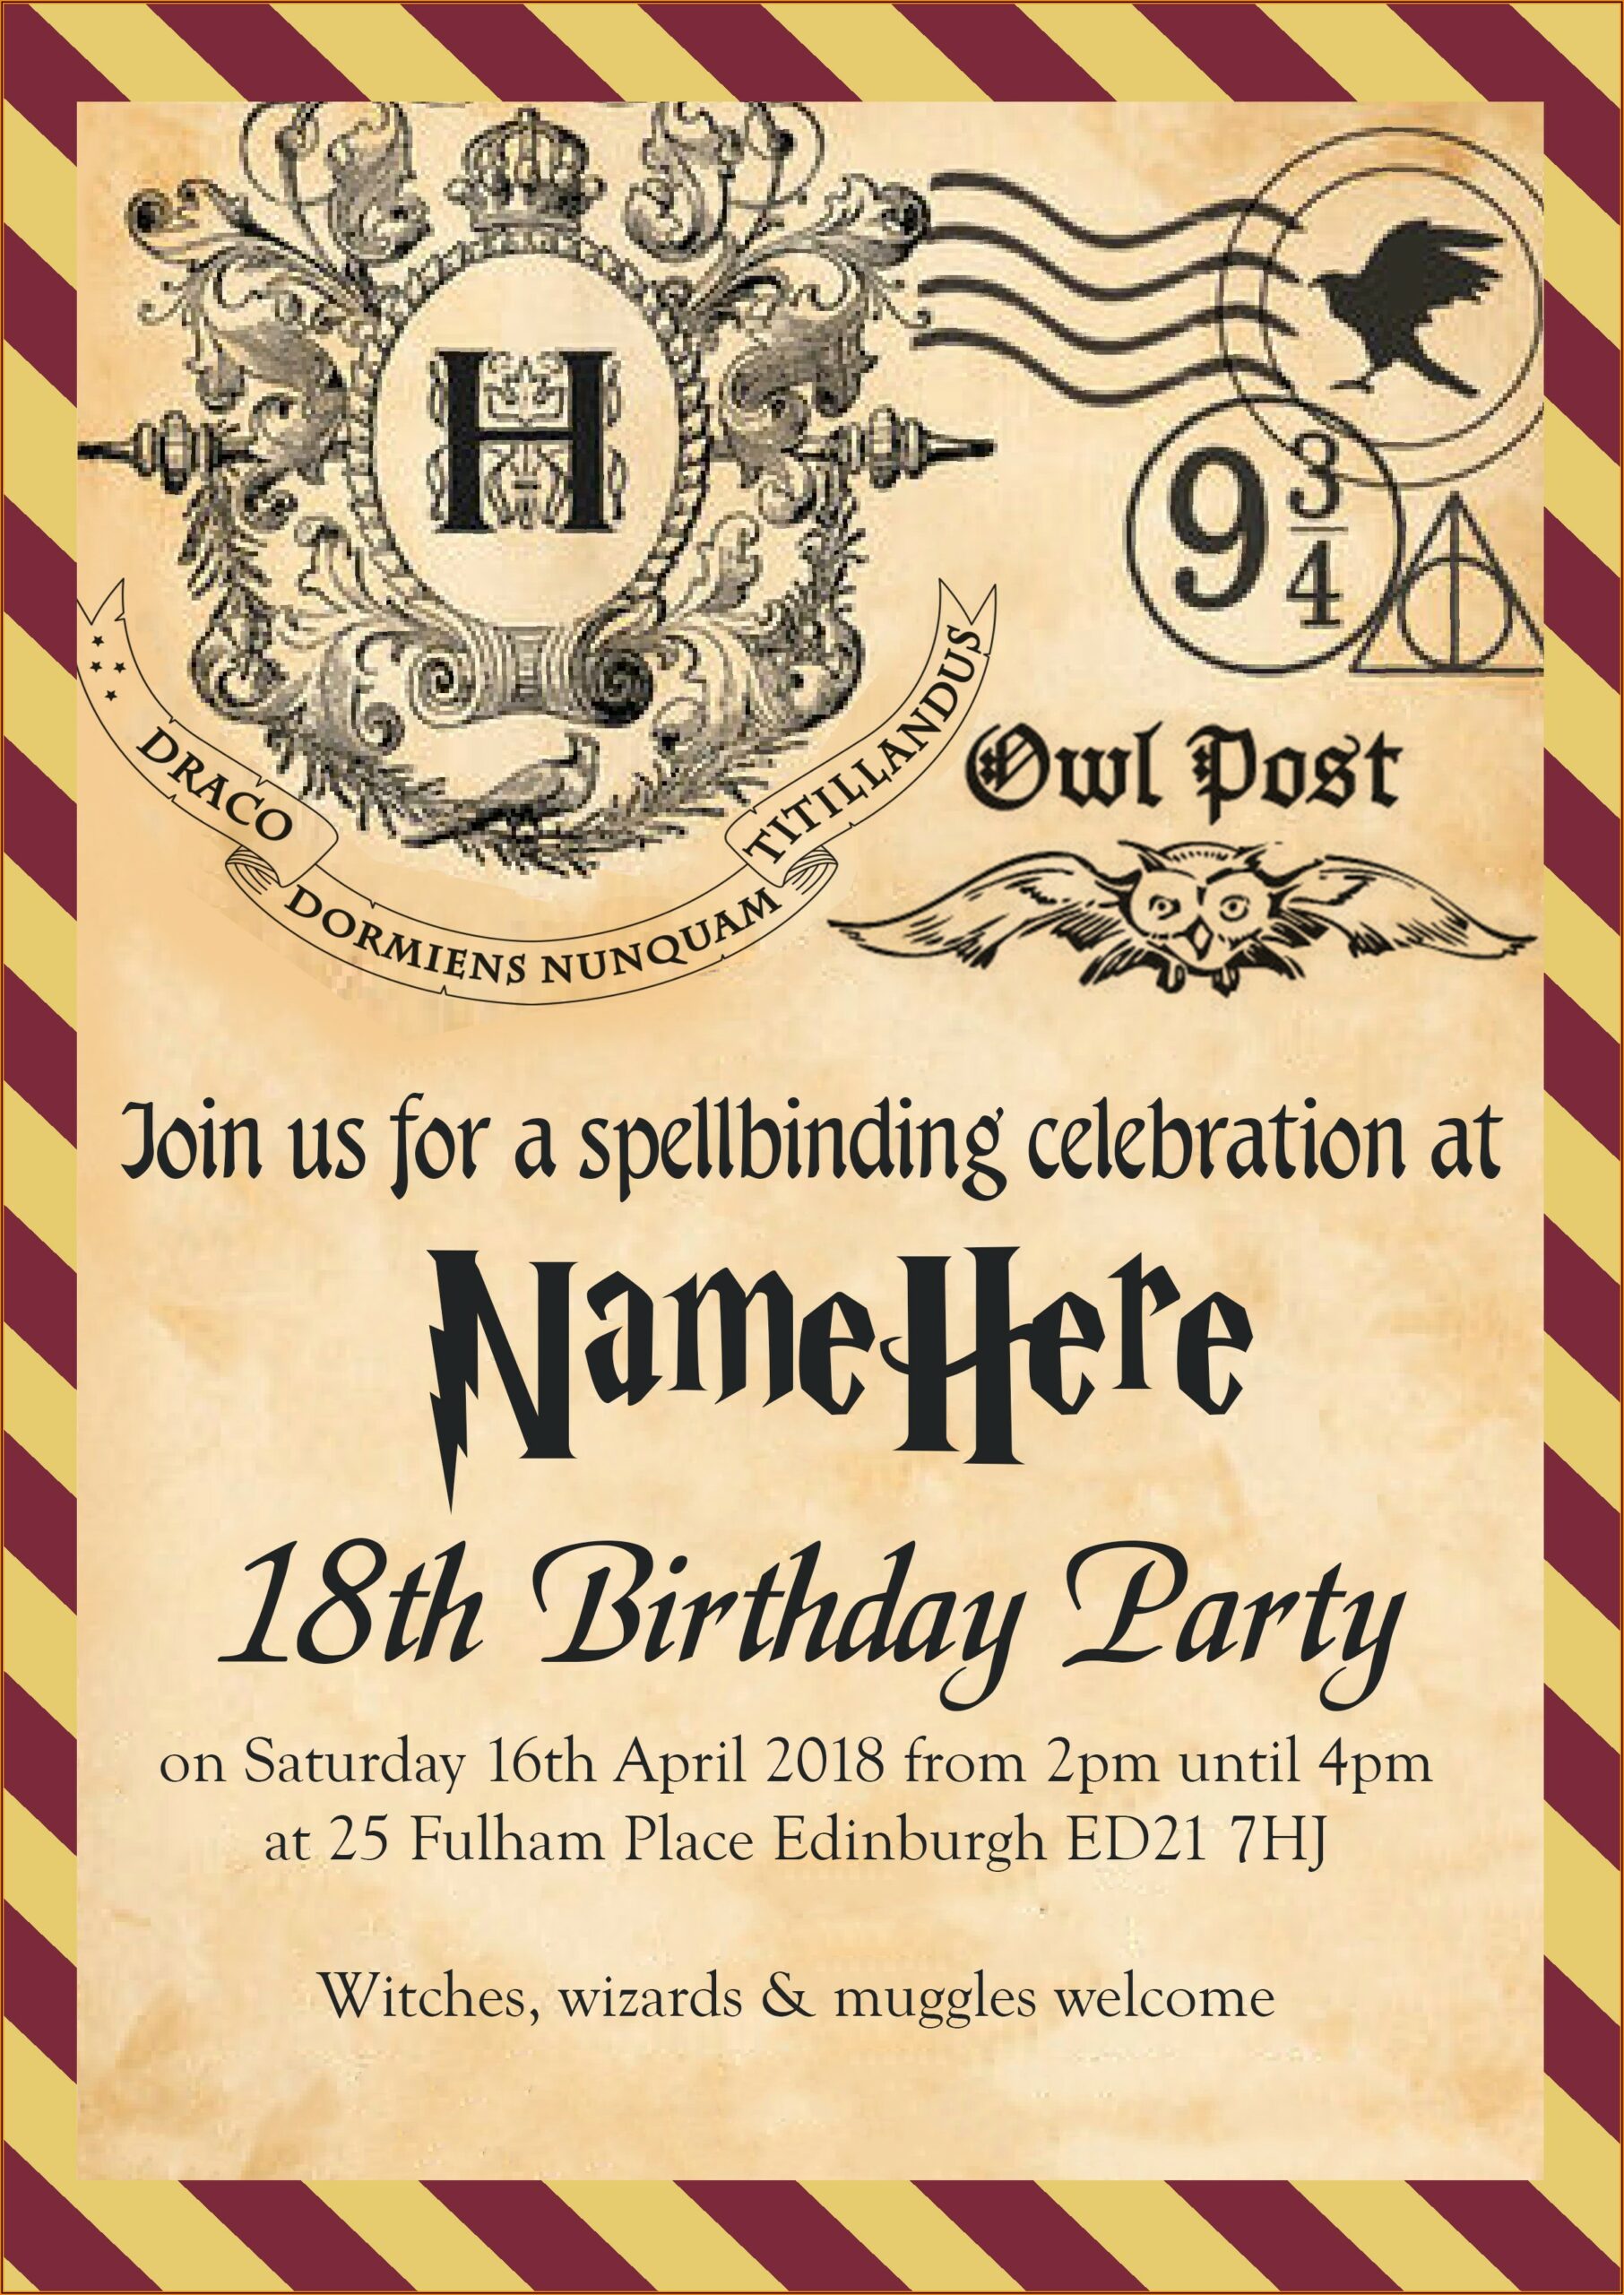 Downloadable Harry Potter Birthday Invitation Template